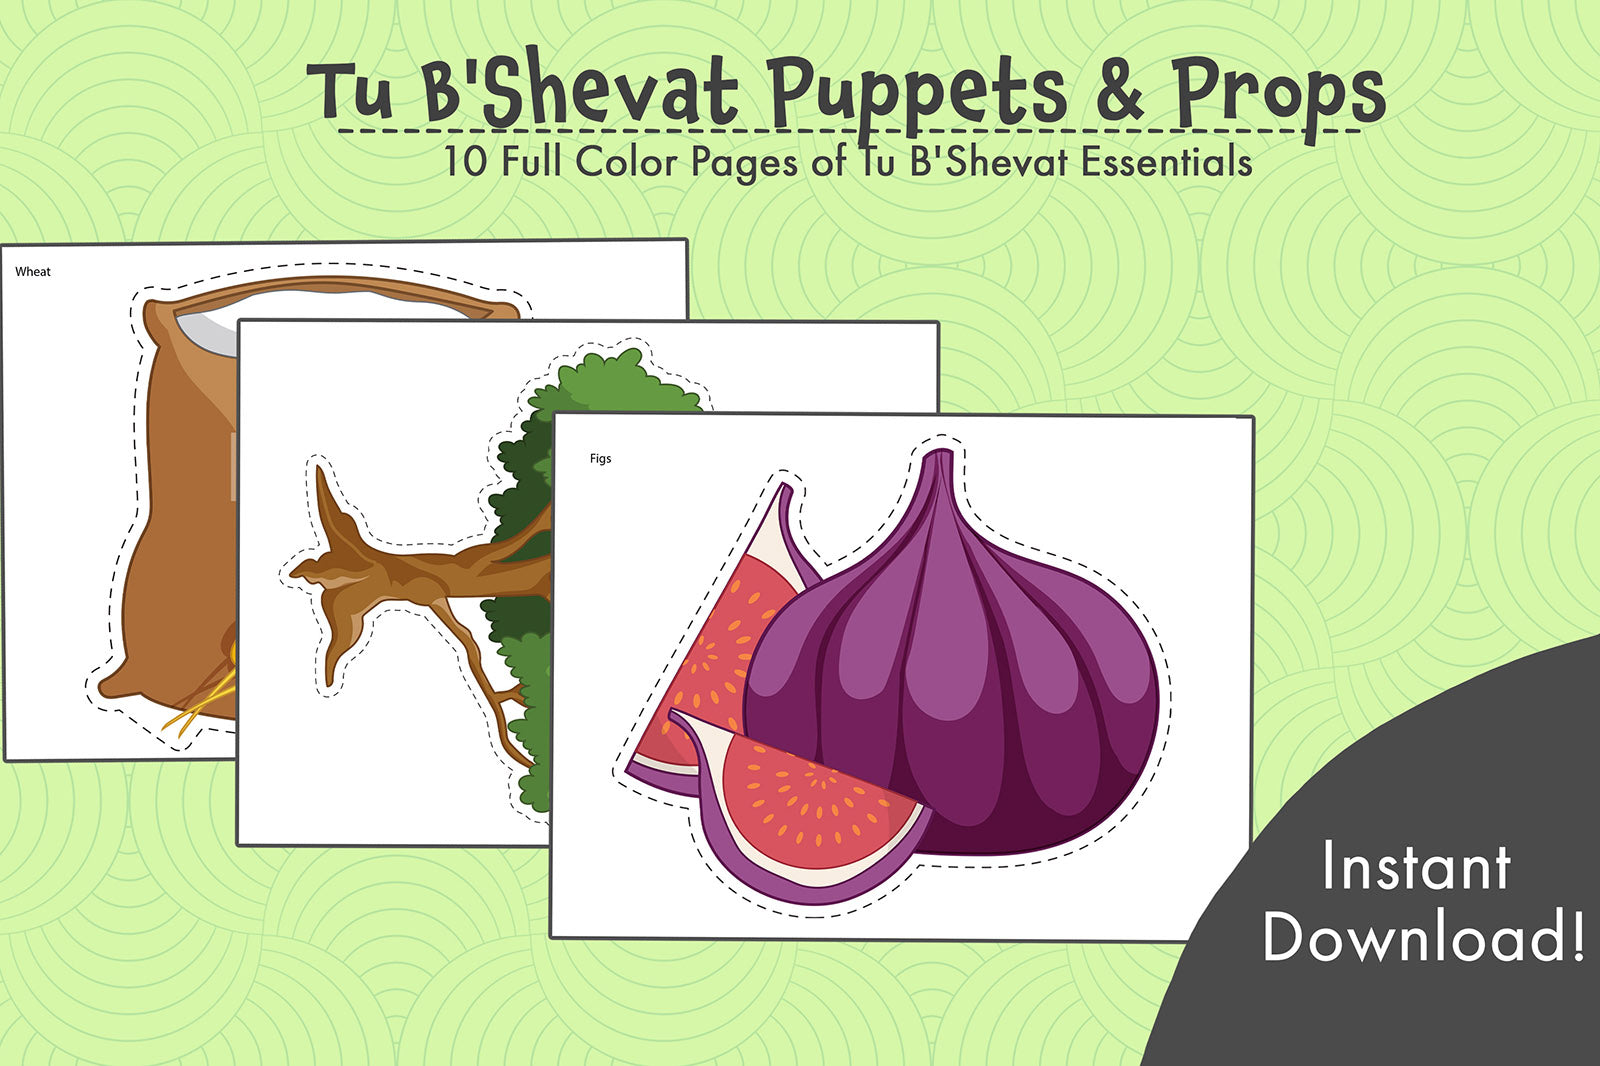 10 Full color pages of adorable Puppets and Props/Bulletin Board Décor for Tu B'shevat - the new year for the trees.  You can use these items to decorate your bulletin board, use as teaching aids or create puppets with them.  What's included?  Tree Large and Small versions of the shivat haminim - 7 species wheat barely grapes figs pomegranates olives dates